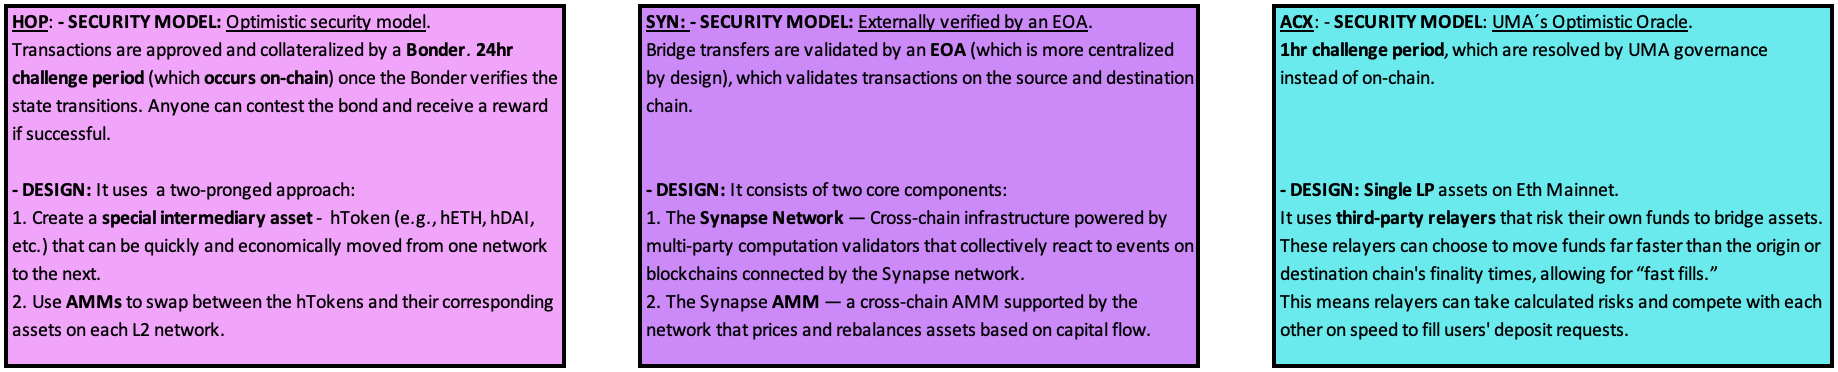 Brief description of the security model and design of Hop, Synapse and Across